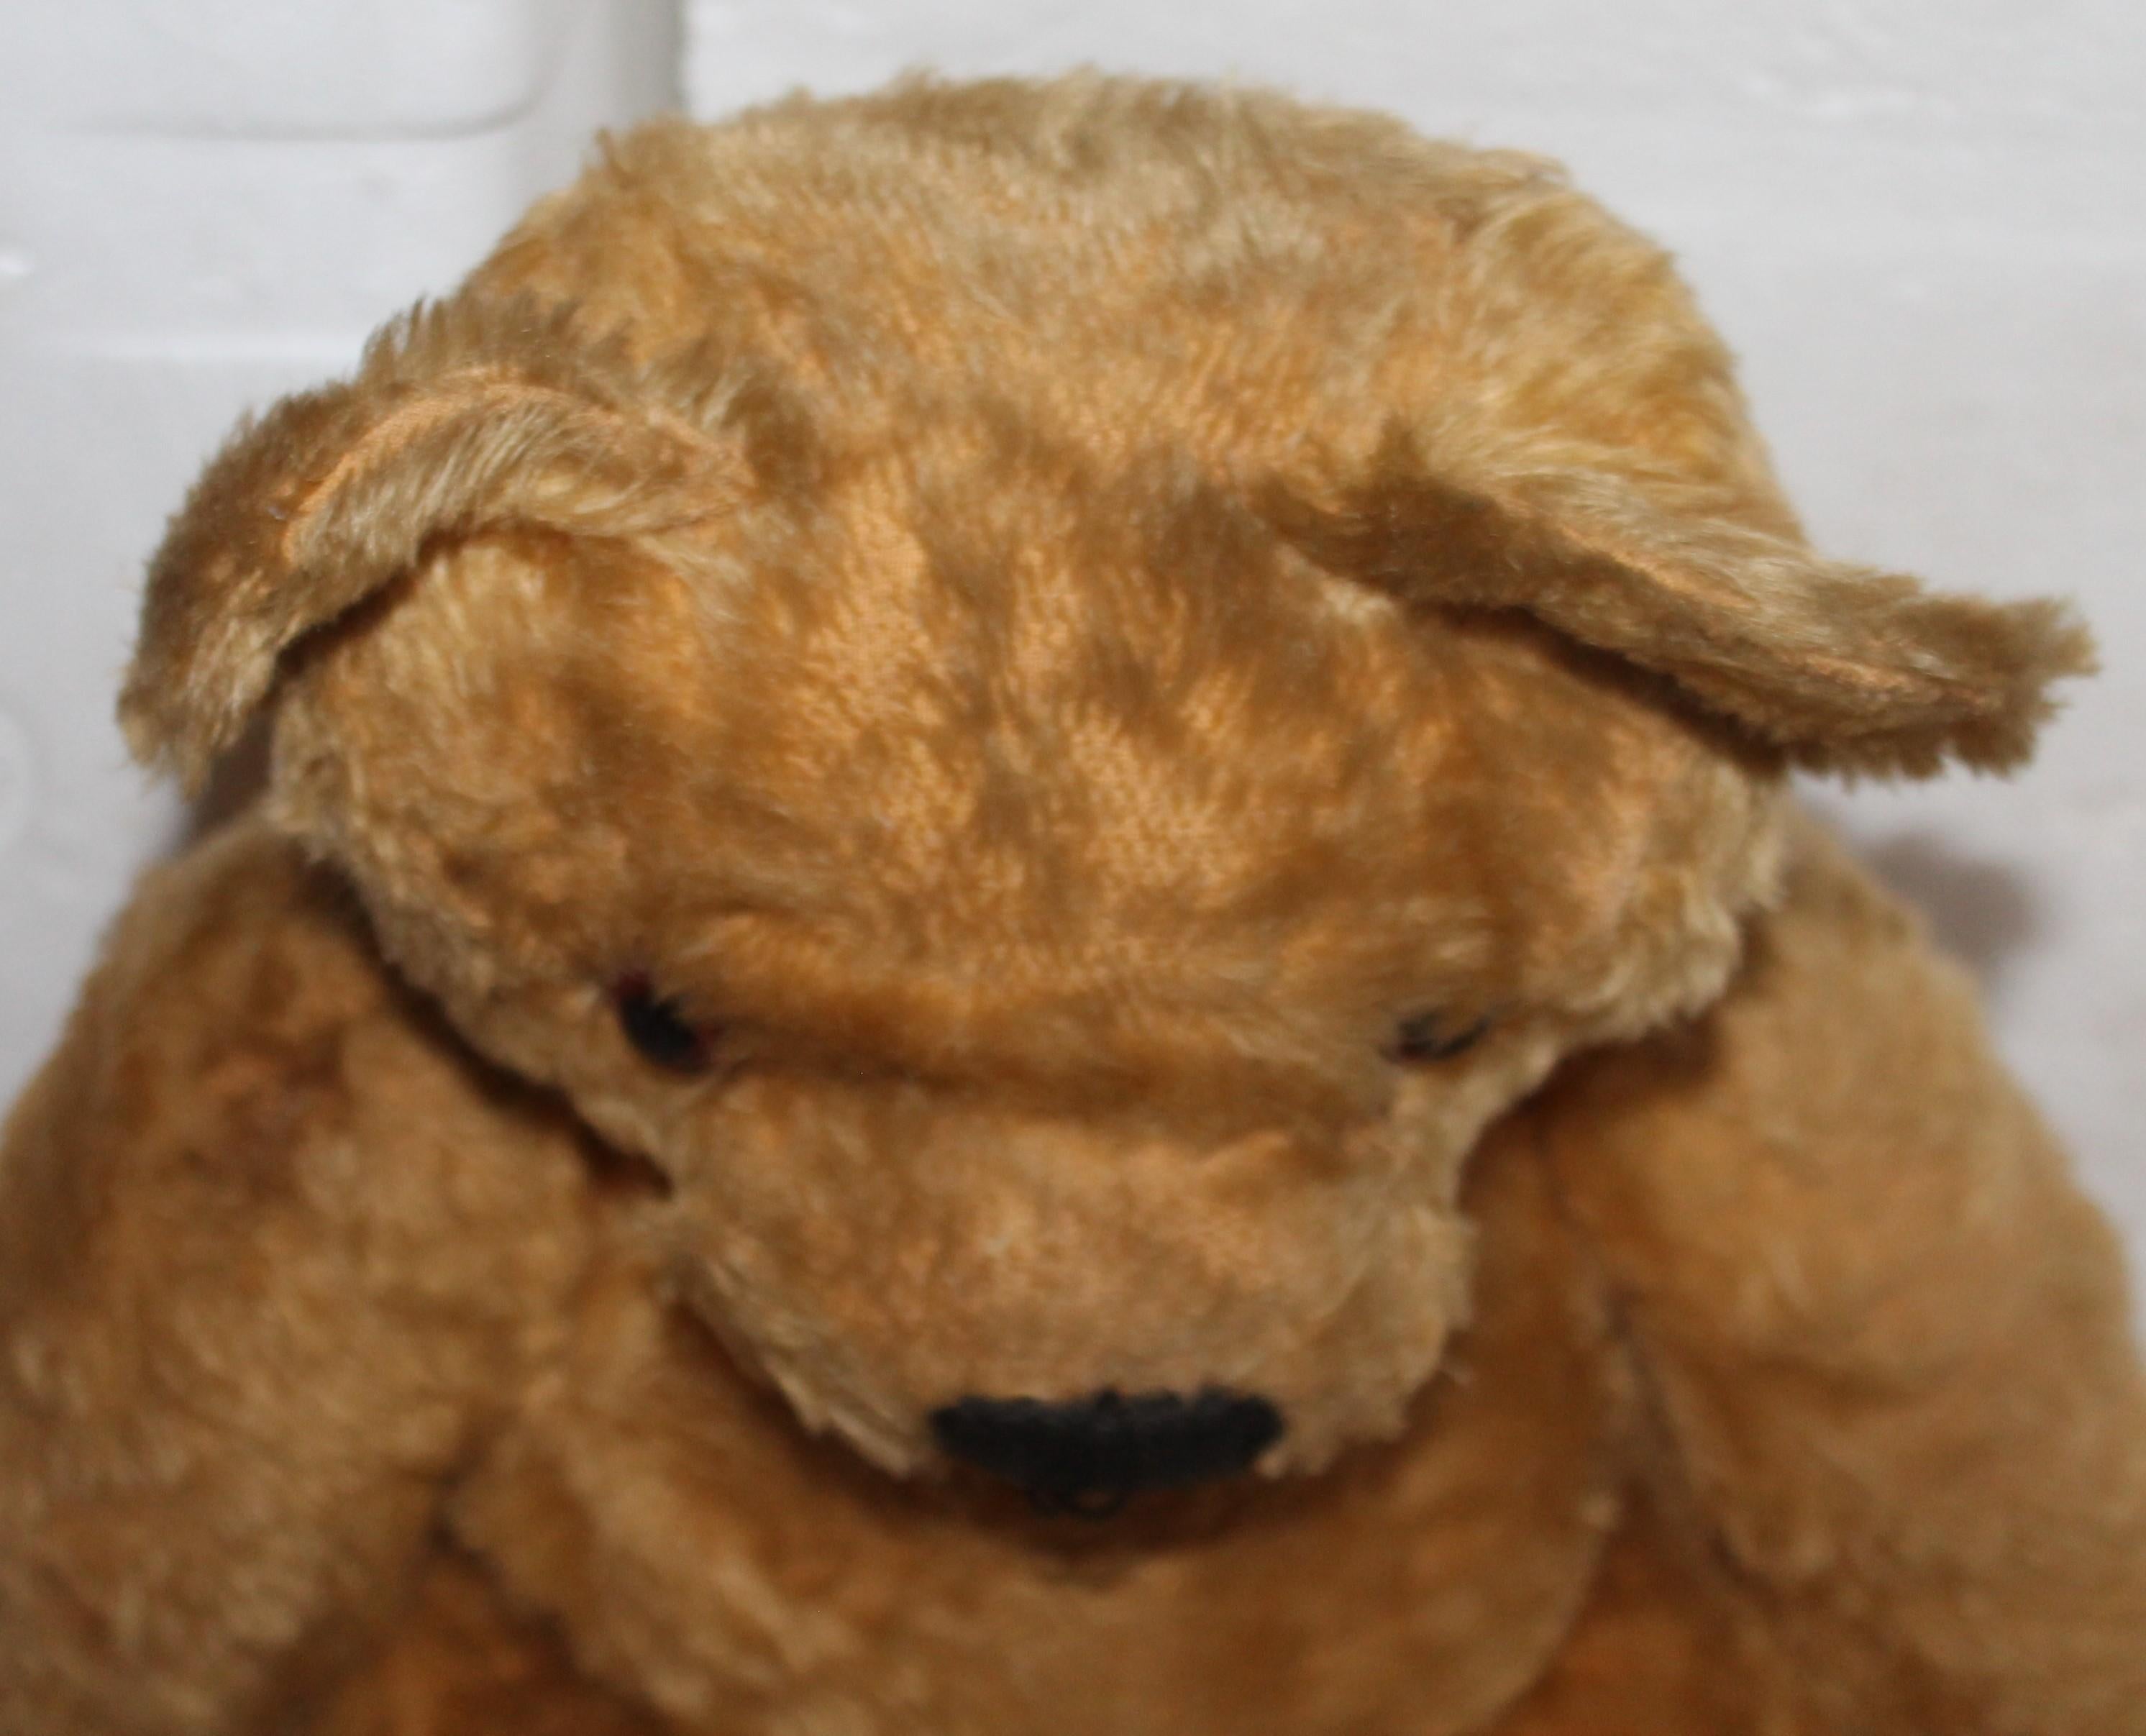 American Jointed 20th Century Hump Back Mohair Bear